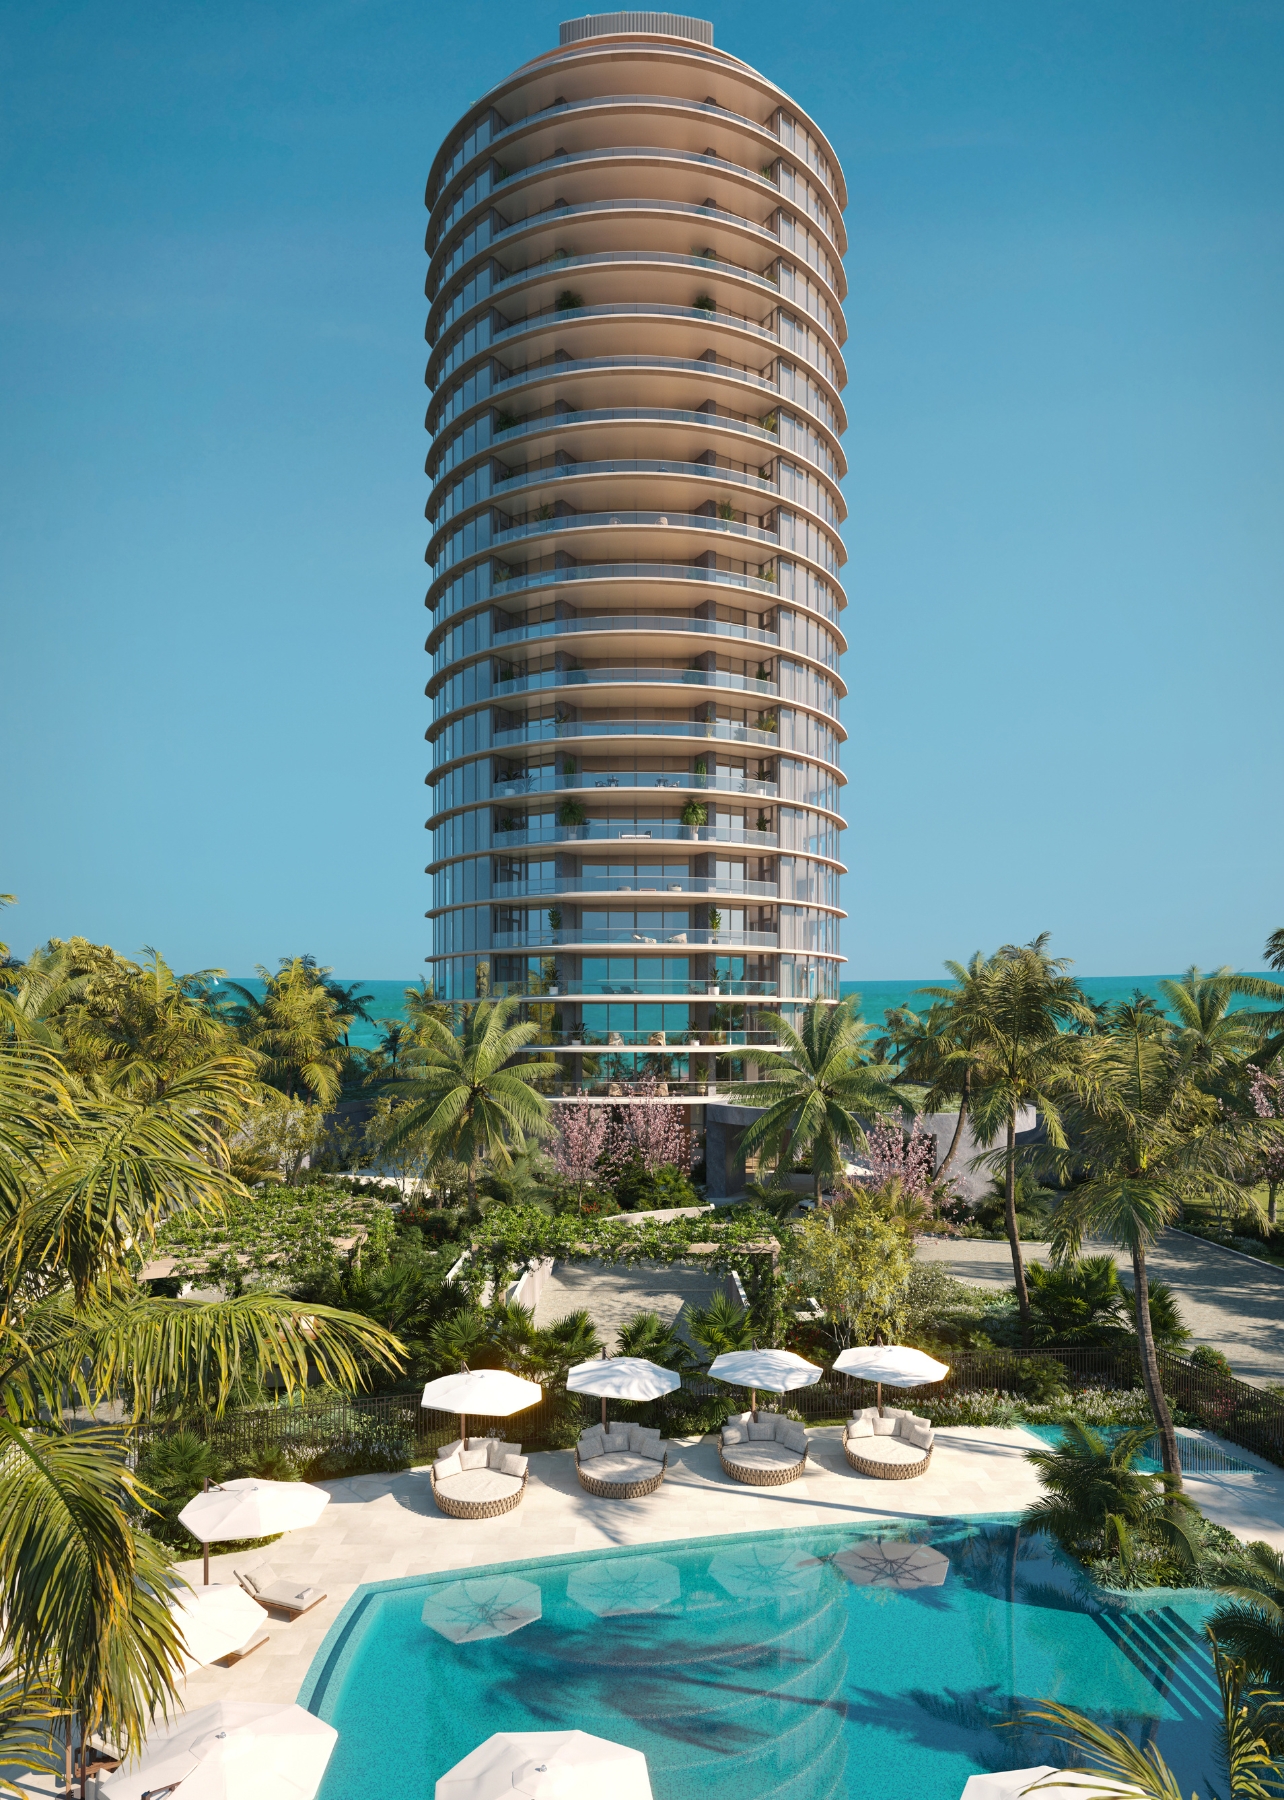 Rivage Bal Harbour Condominium full building view with pool and lounge chairs and umbrellas